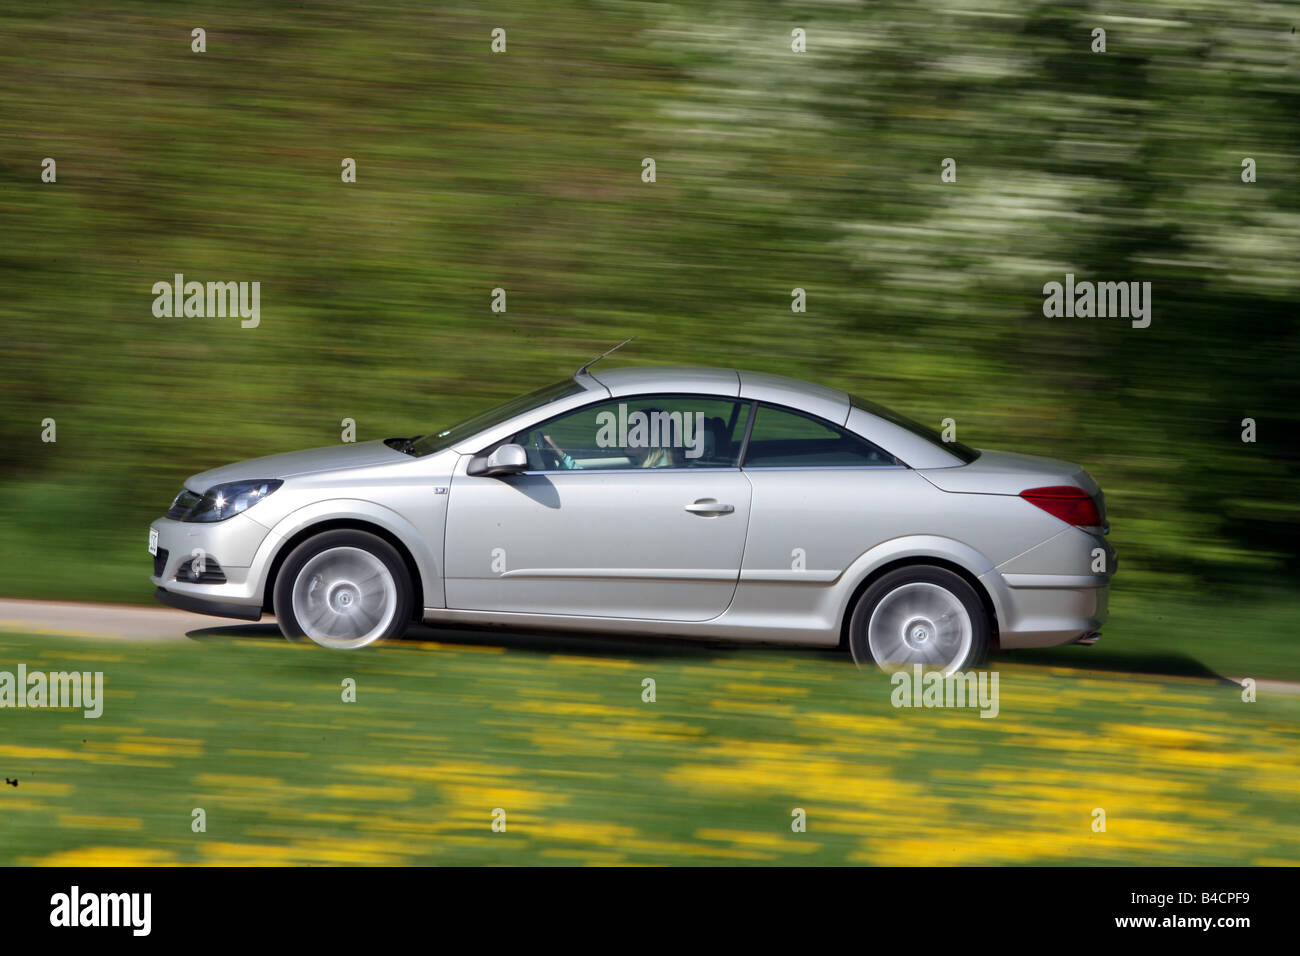 Opel Astra 1 9 Cdti Twin Top Model Year 06 Silver Driving Side Stock Photo Alamy